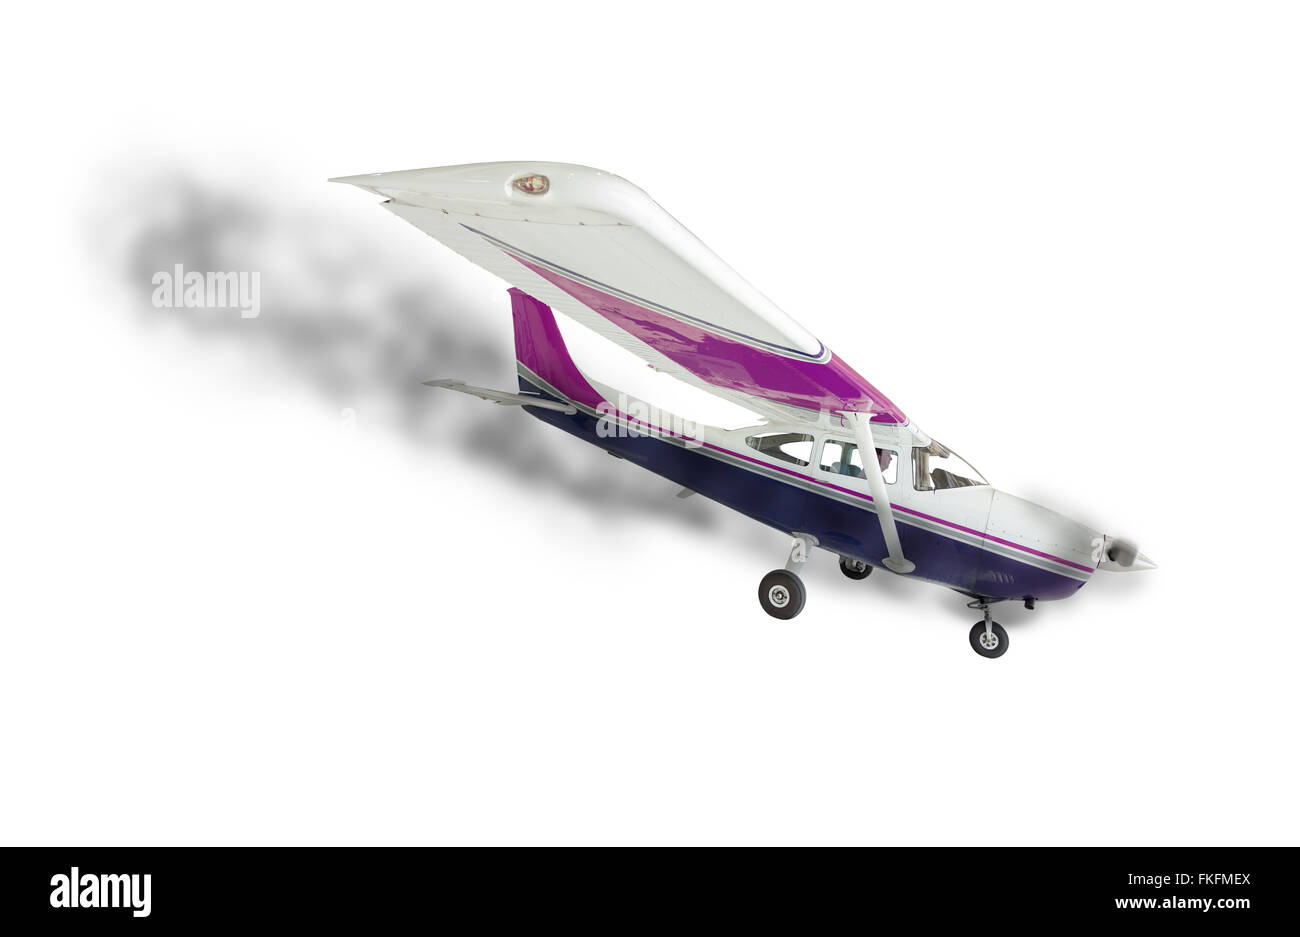 The Cessna 172 With Smoke Coming From Engine on a White Background. Stock Photo